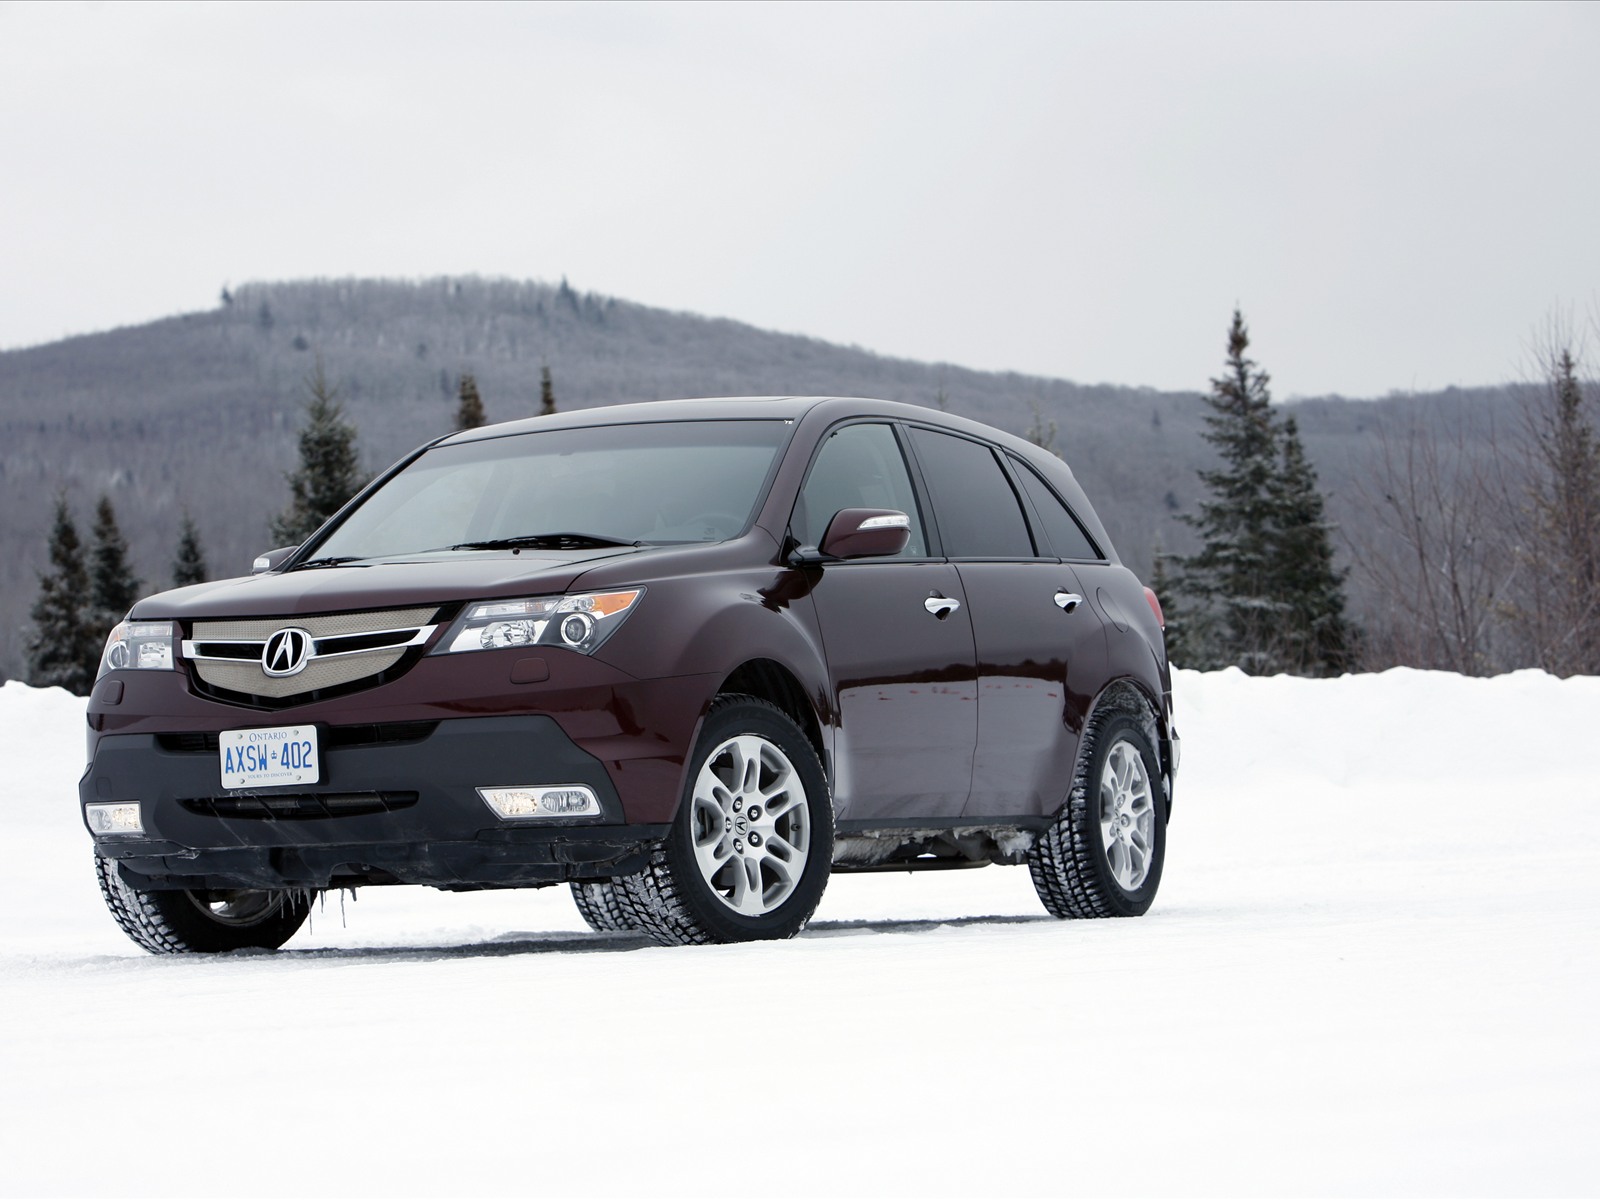 acura mdx Wallpapers hd A3 suv